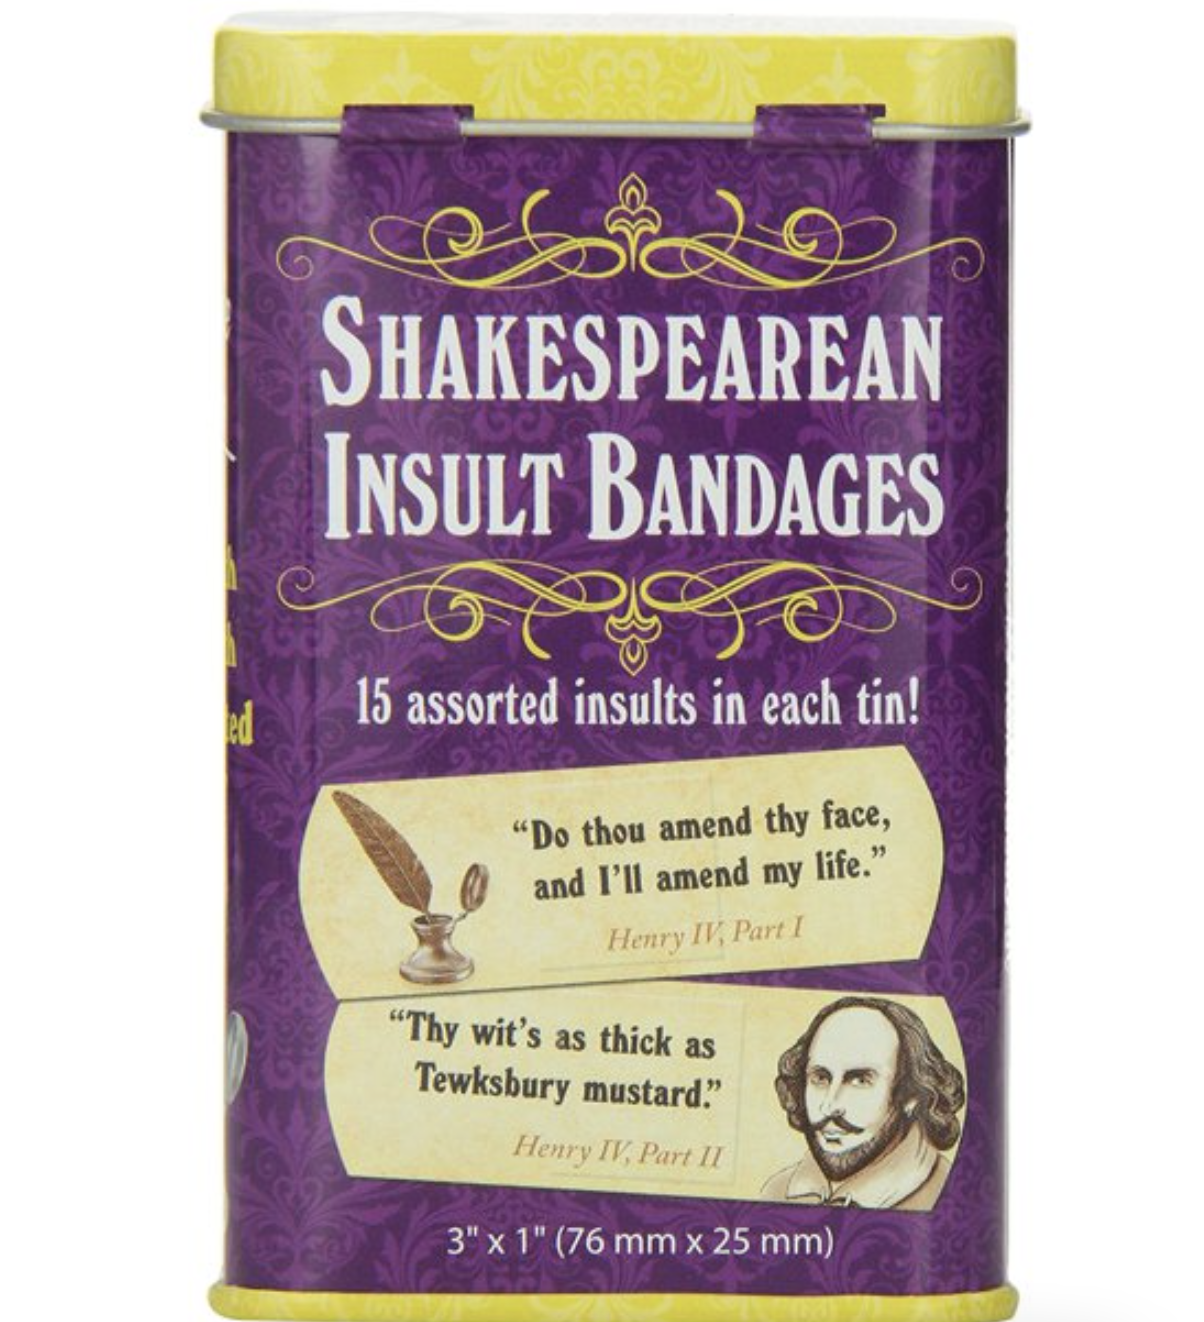 tin bandage container with examples of the jokes on the front